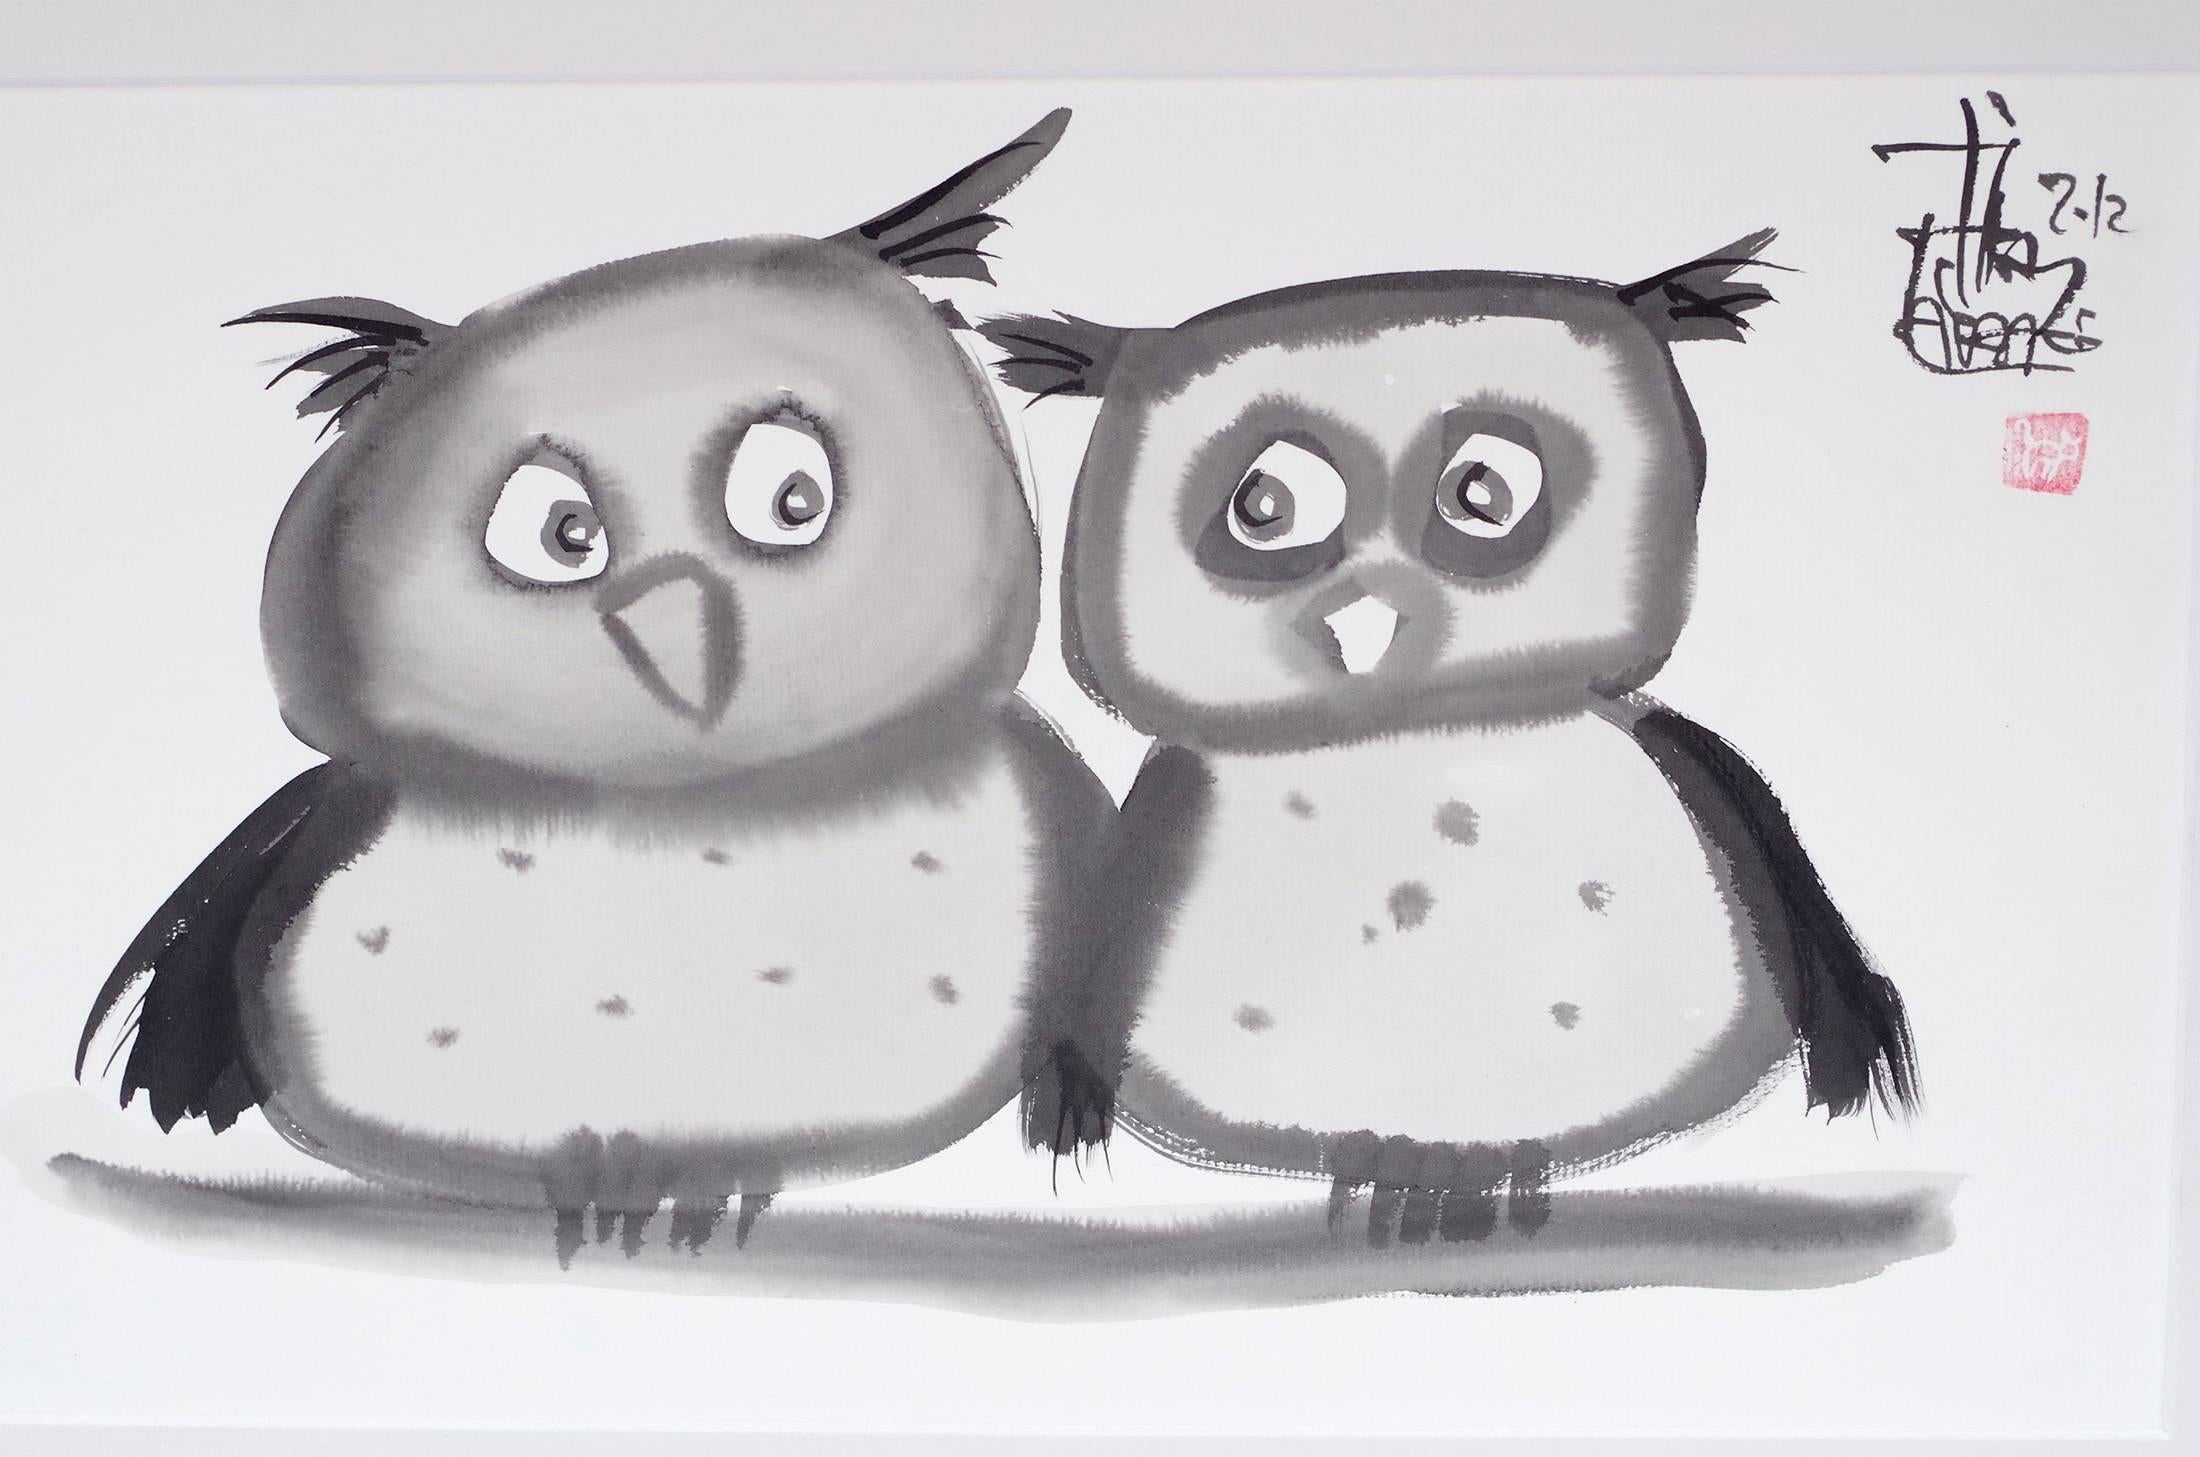 Indian ink and wash on paper depicting a pair of owls, in a black molded wood frame in Dutch style. Signed and dated 2012 at the top right corner. Signed with a monogram, as a tribute to the masters of this Asian technique.
Laszlo Tibay (1962-) is